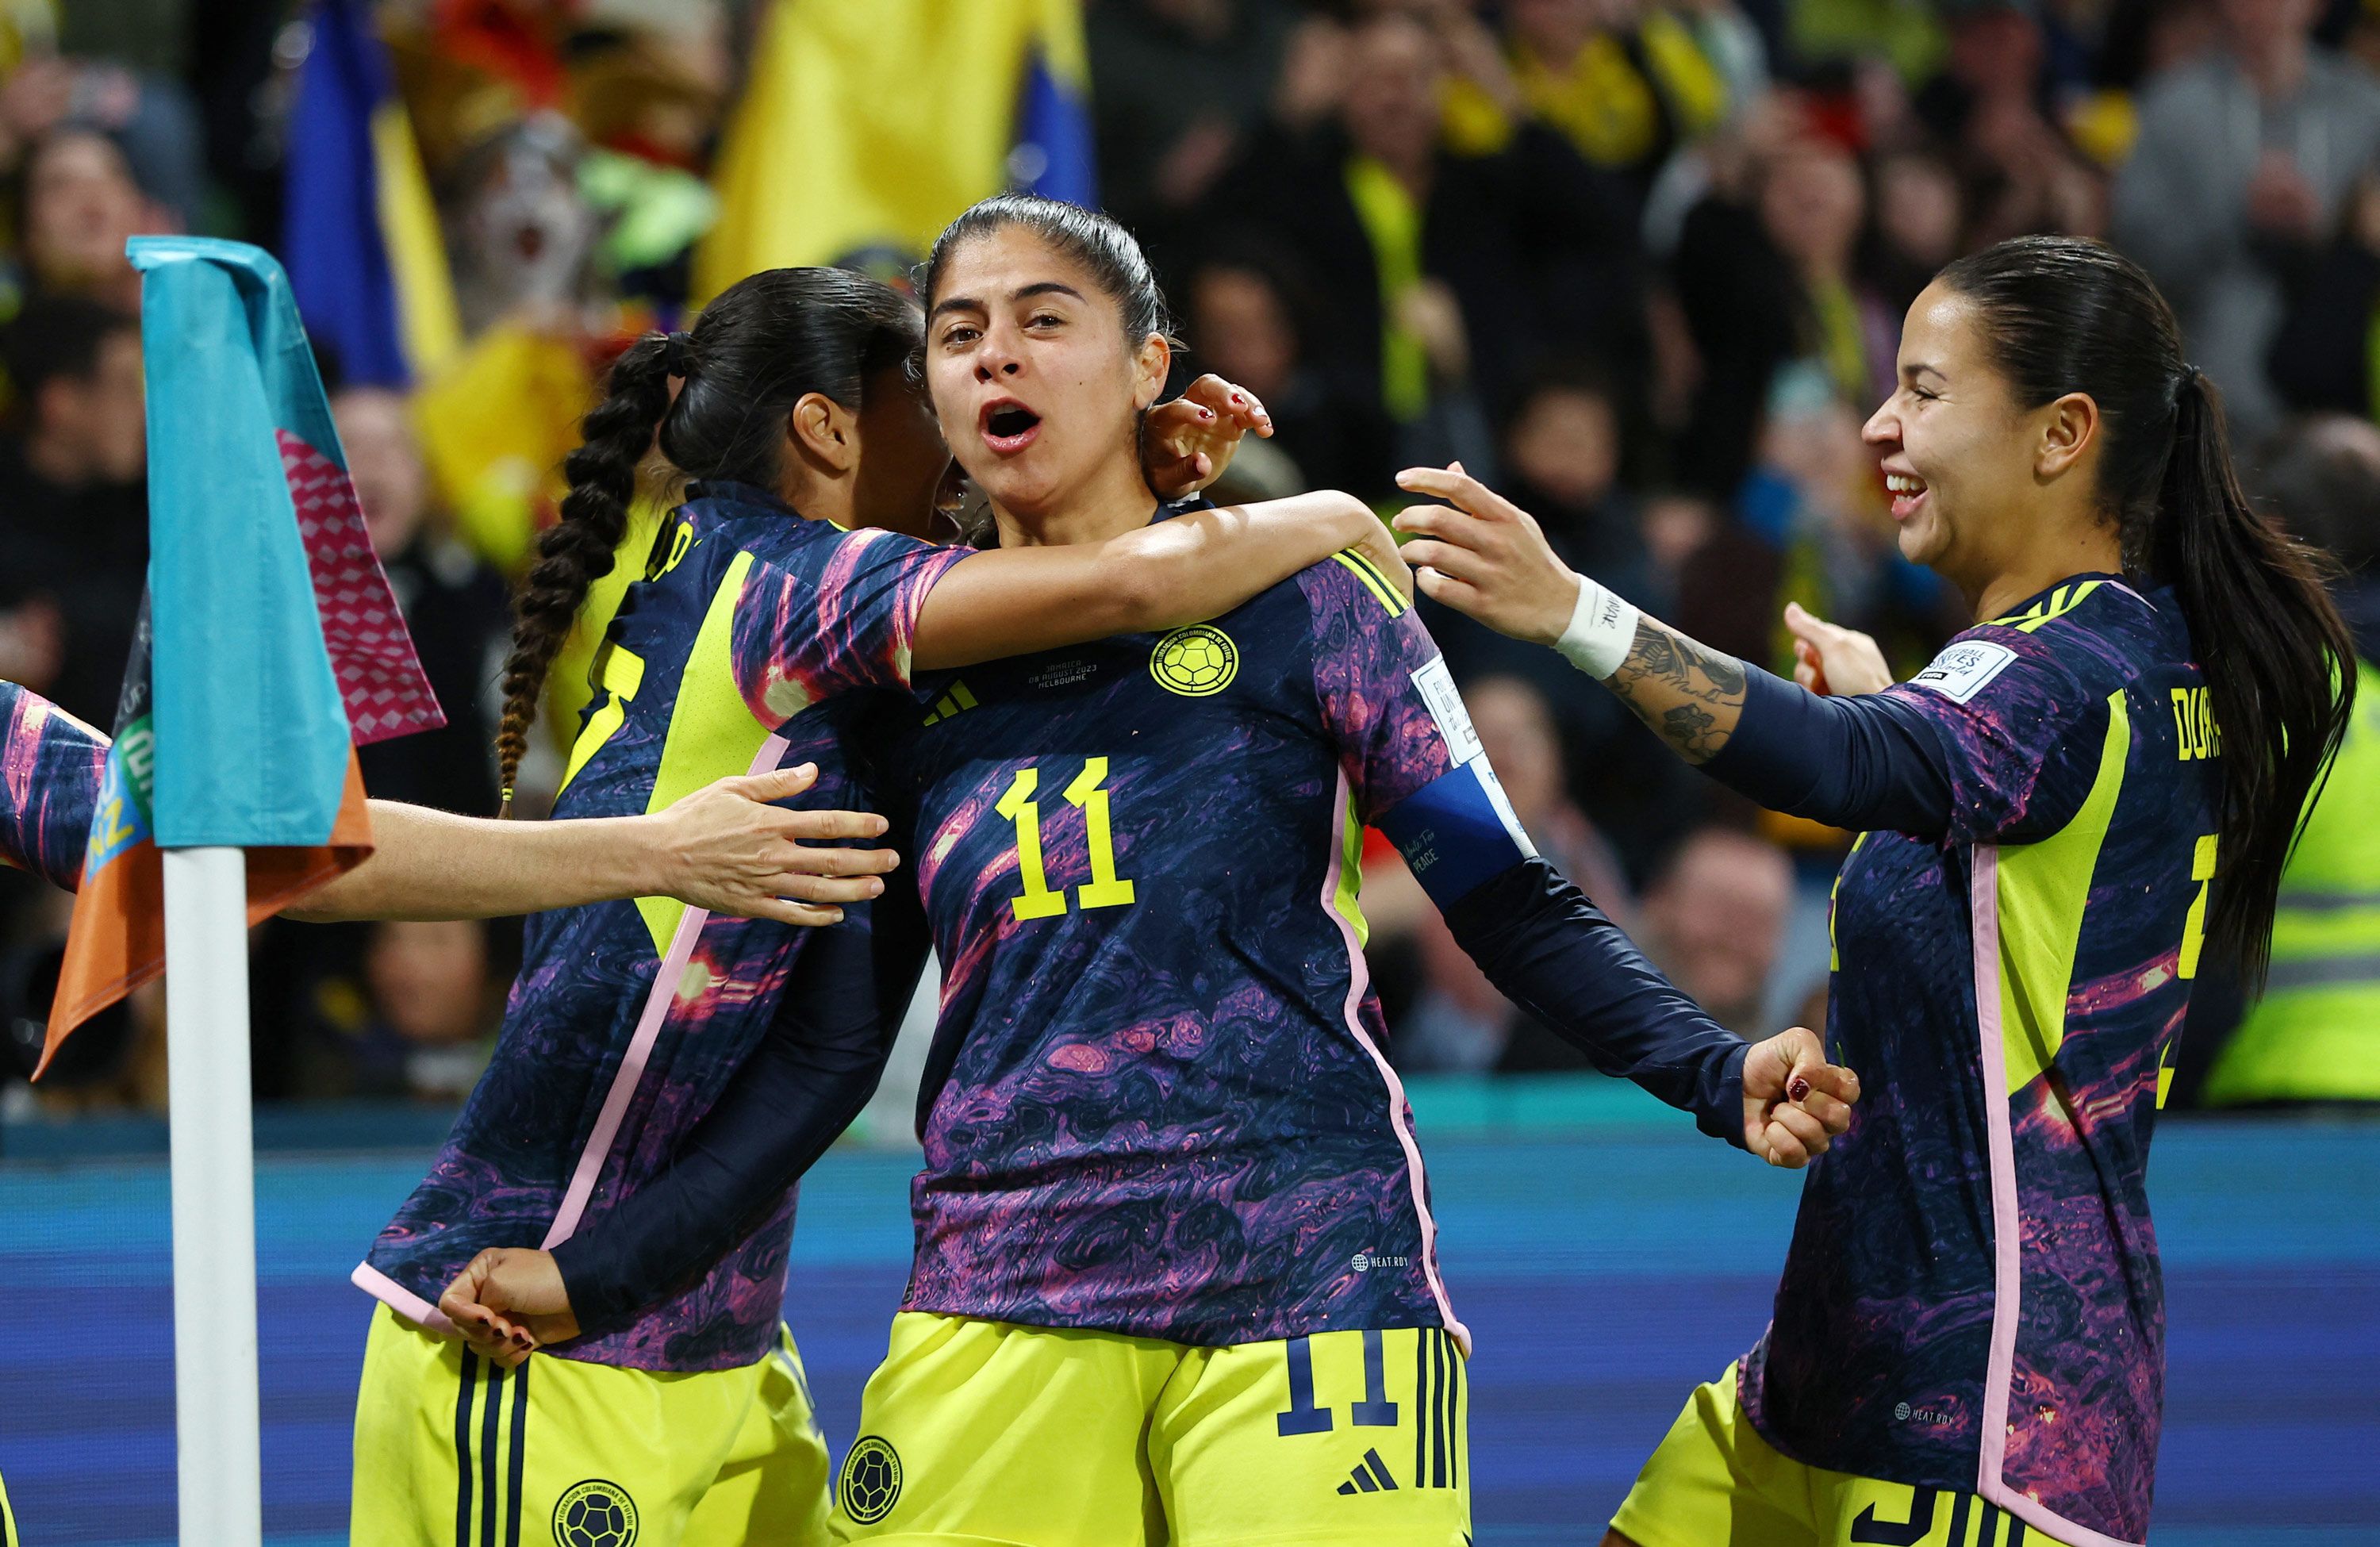 Colombia is inspiring a nation back home, as it becomes neutral's favorite  team at the Women's World Cup